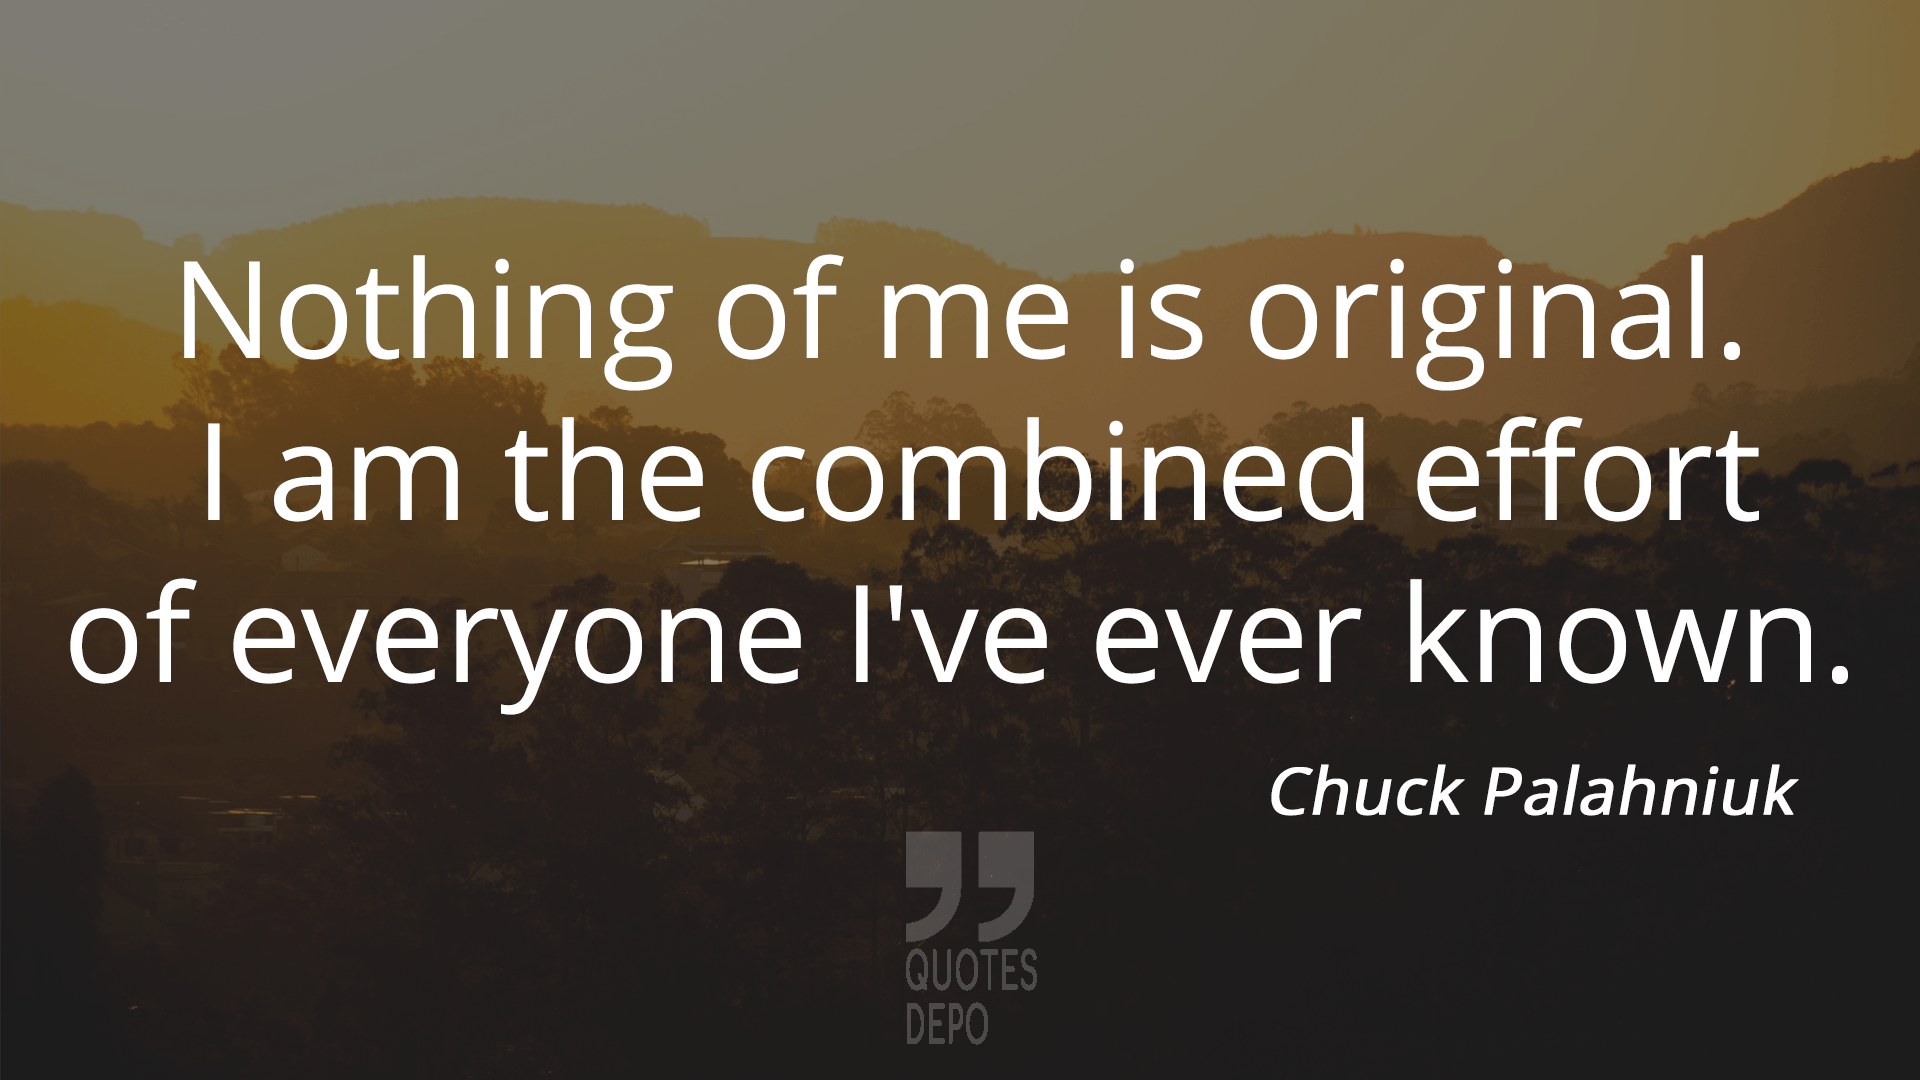 nothing of me is original - chuck palahniuk quotes